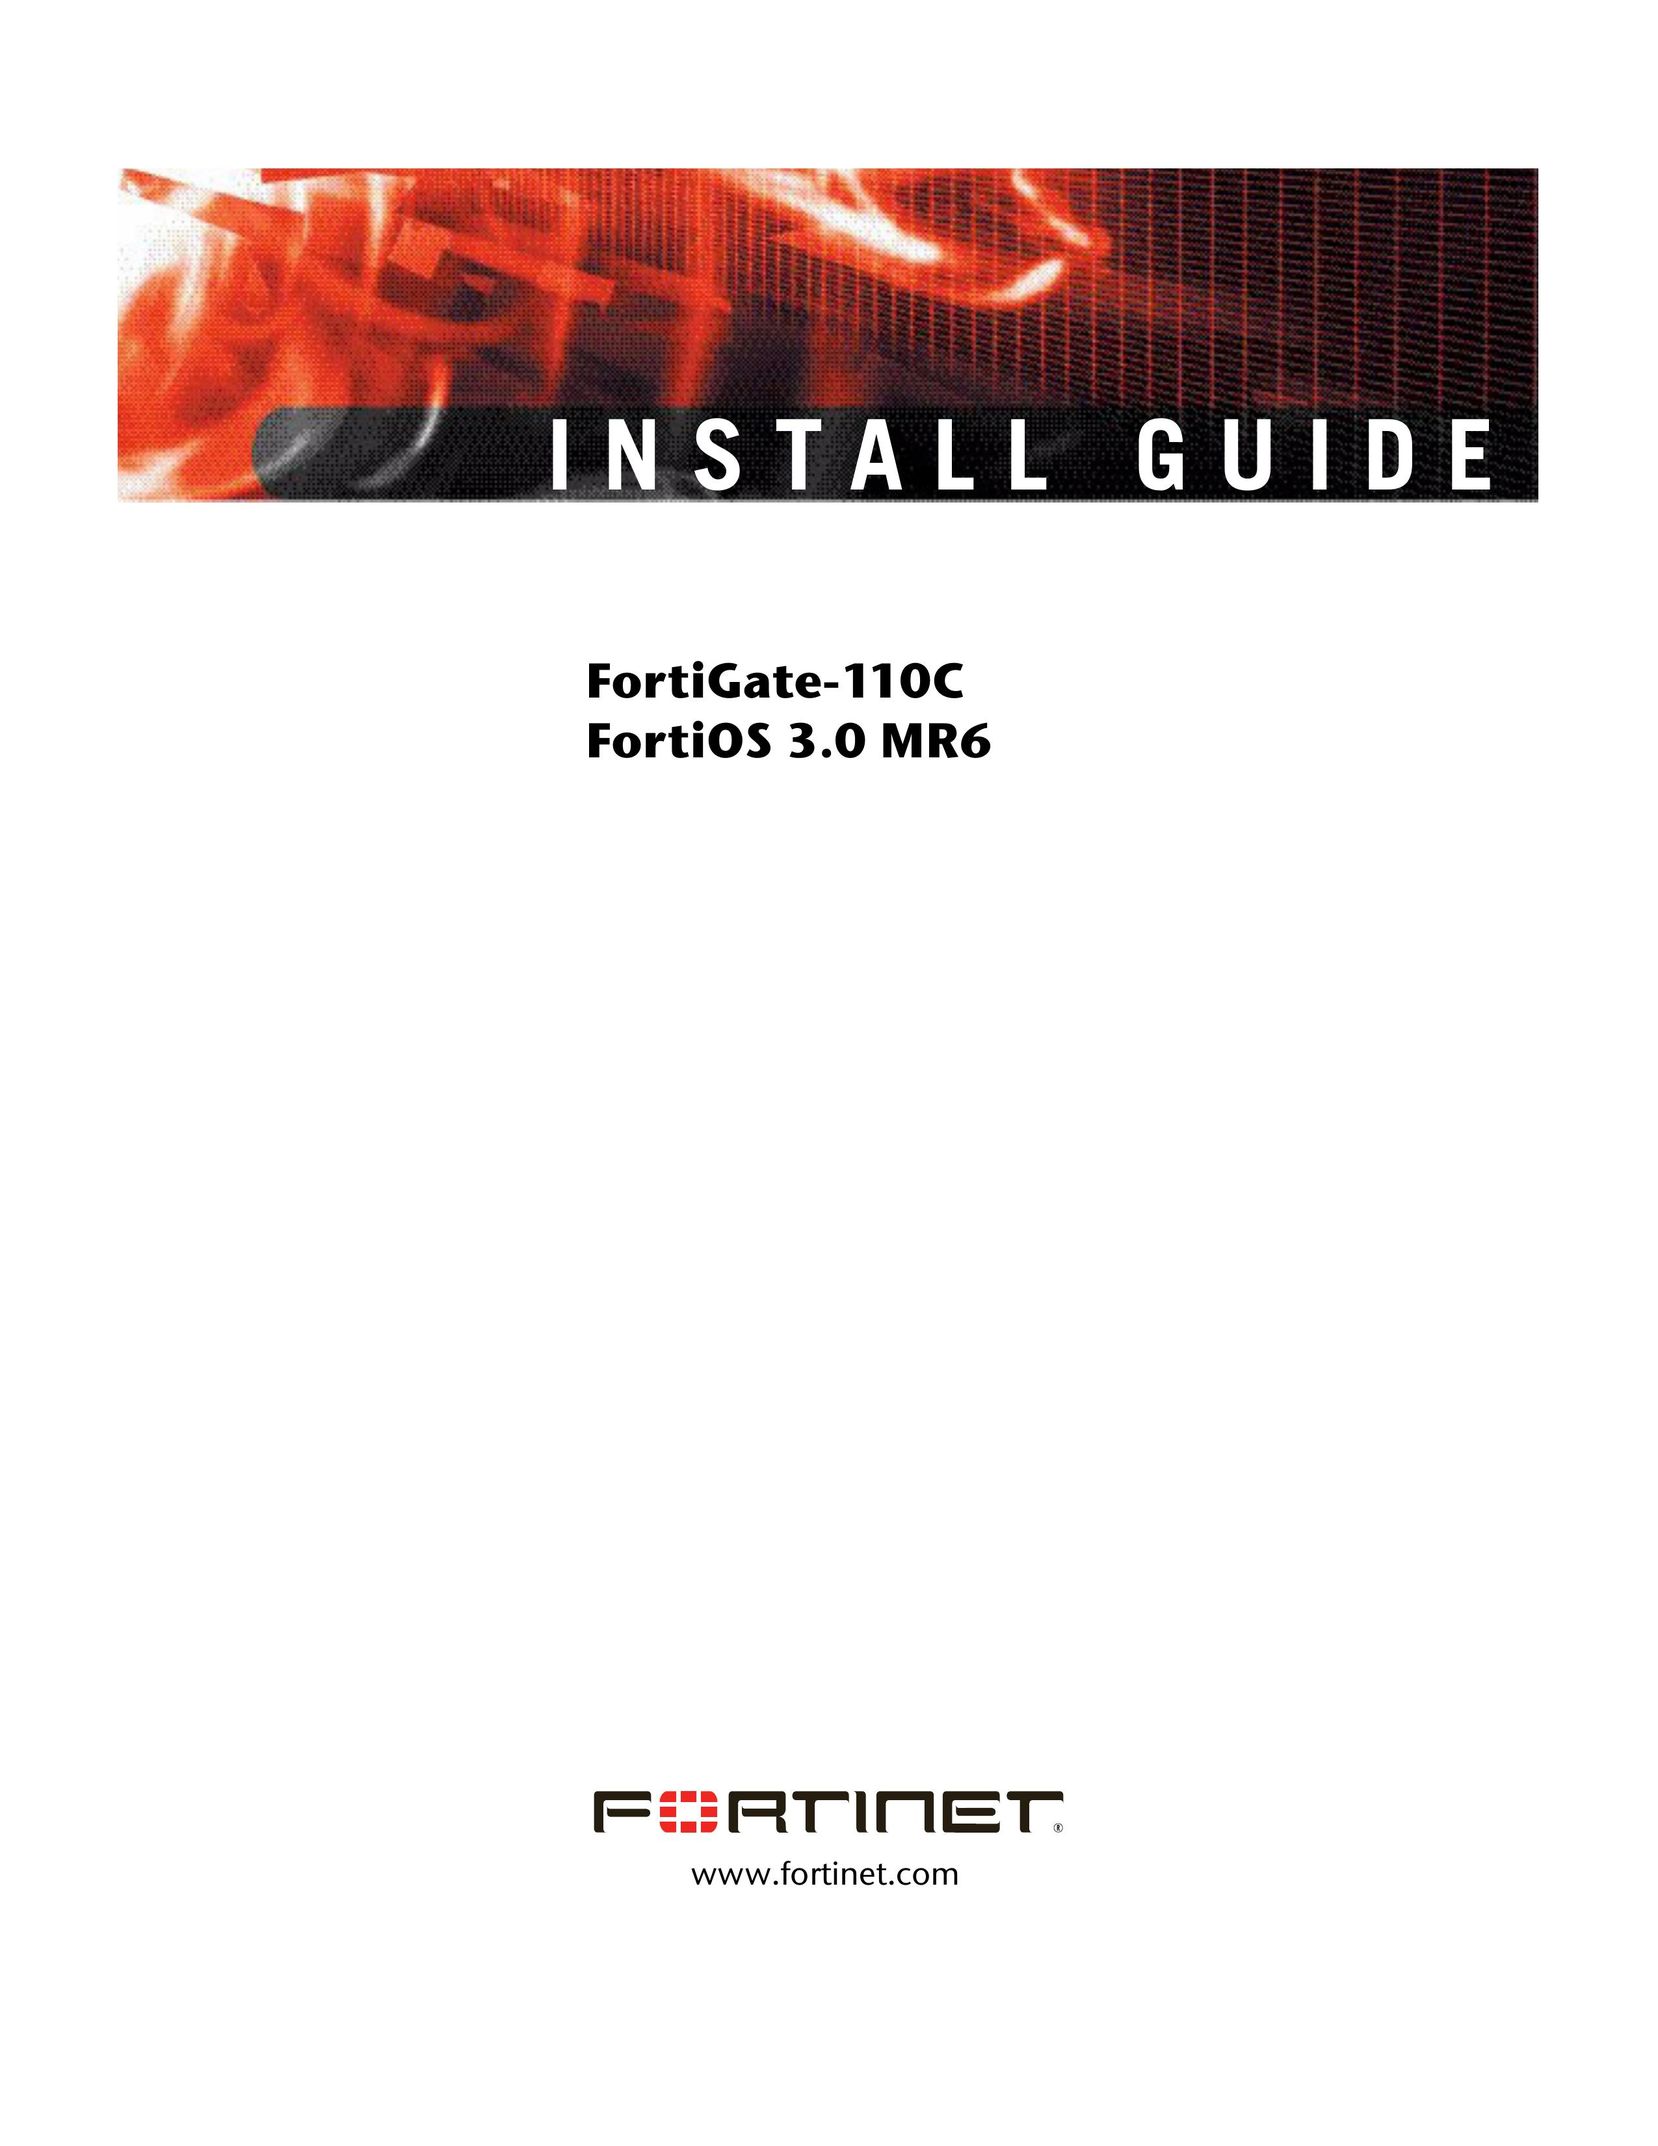 Fortinet 110C Network Card User Manual